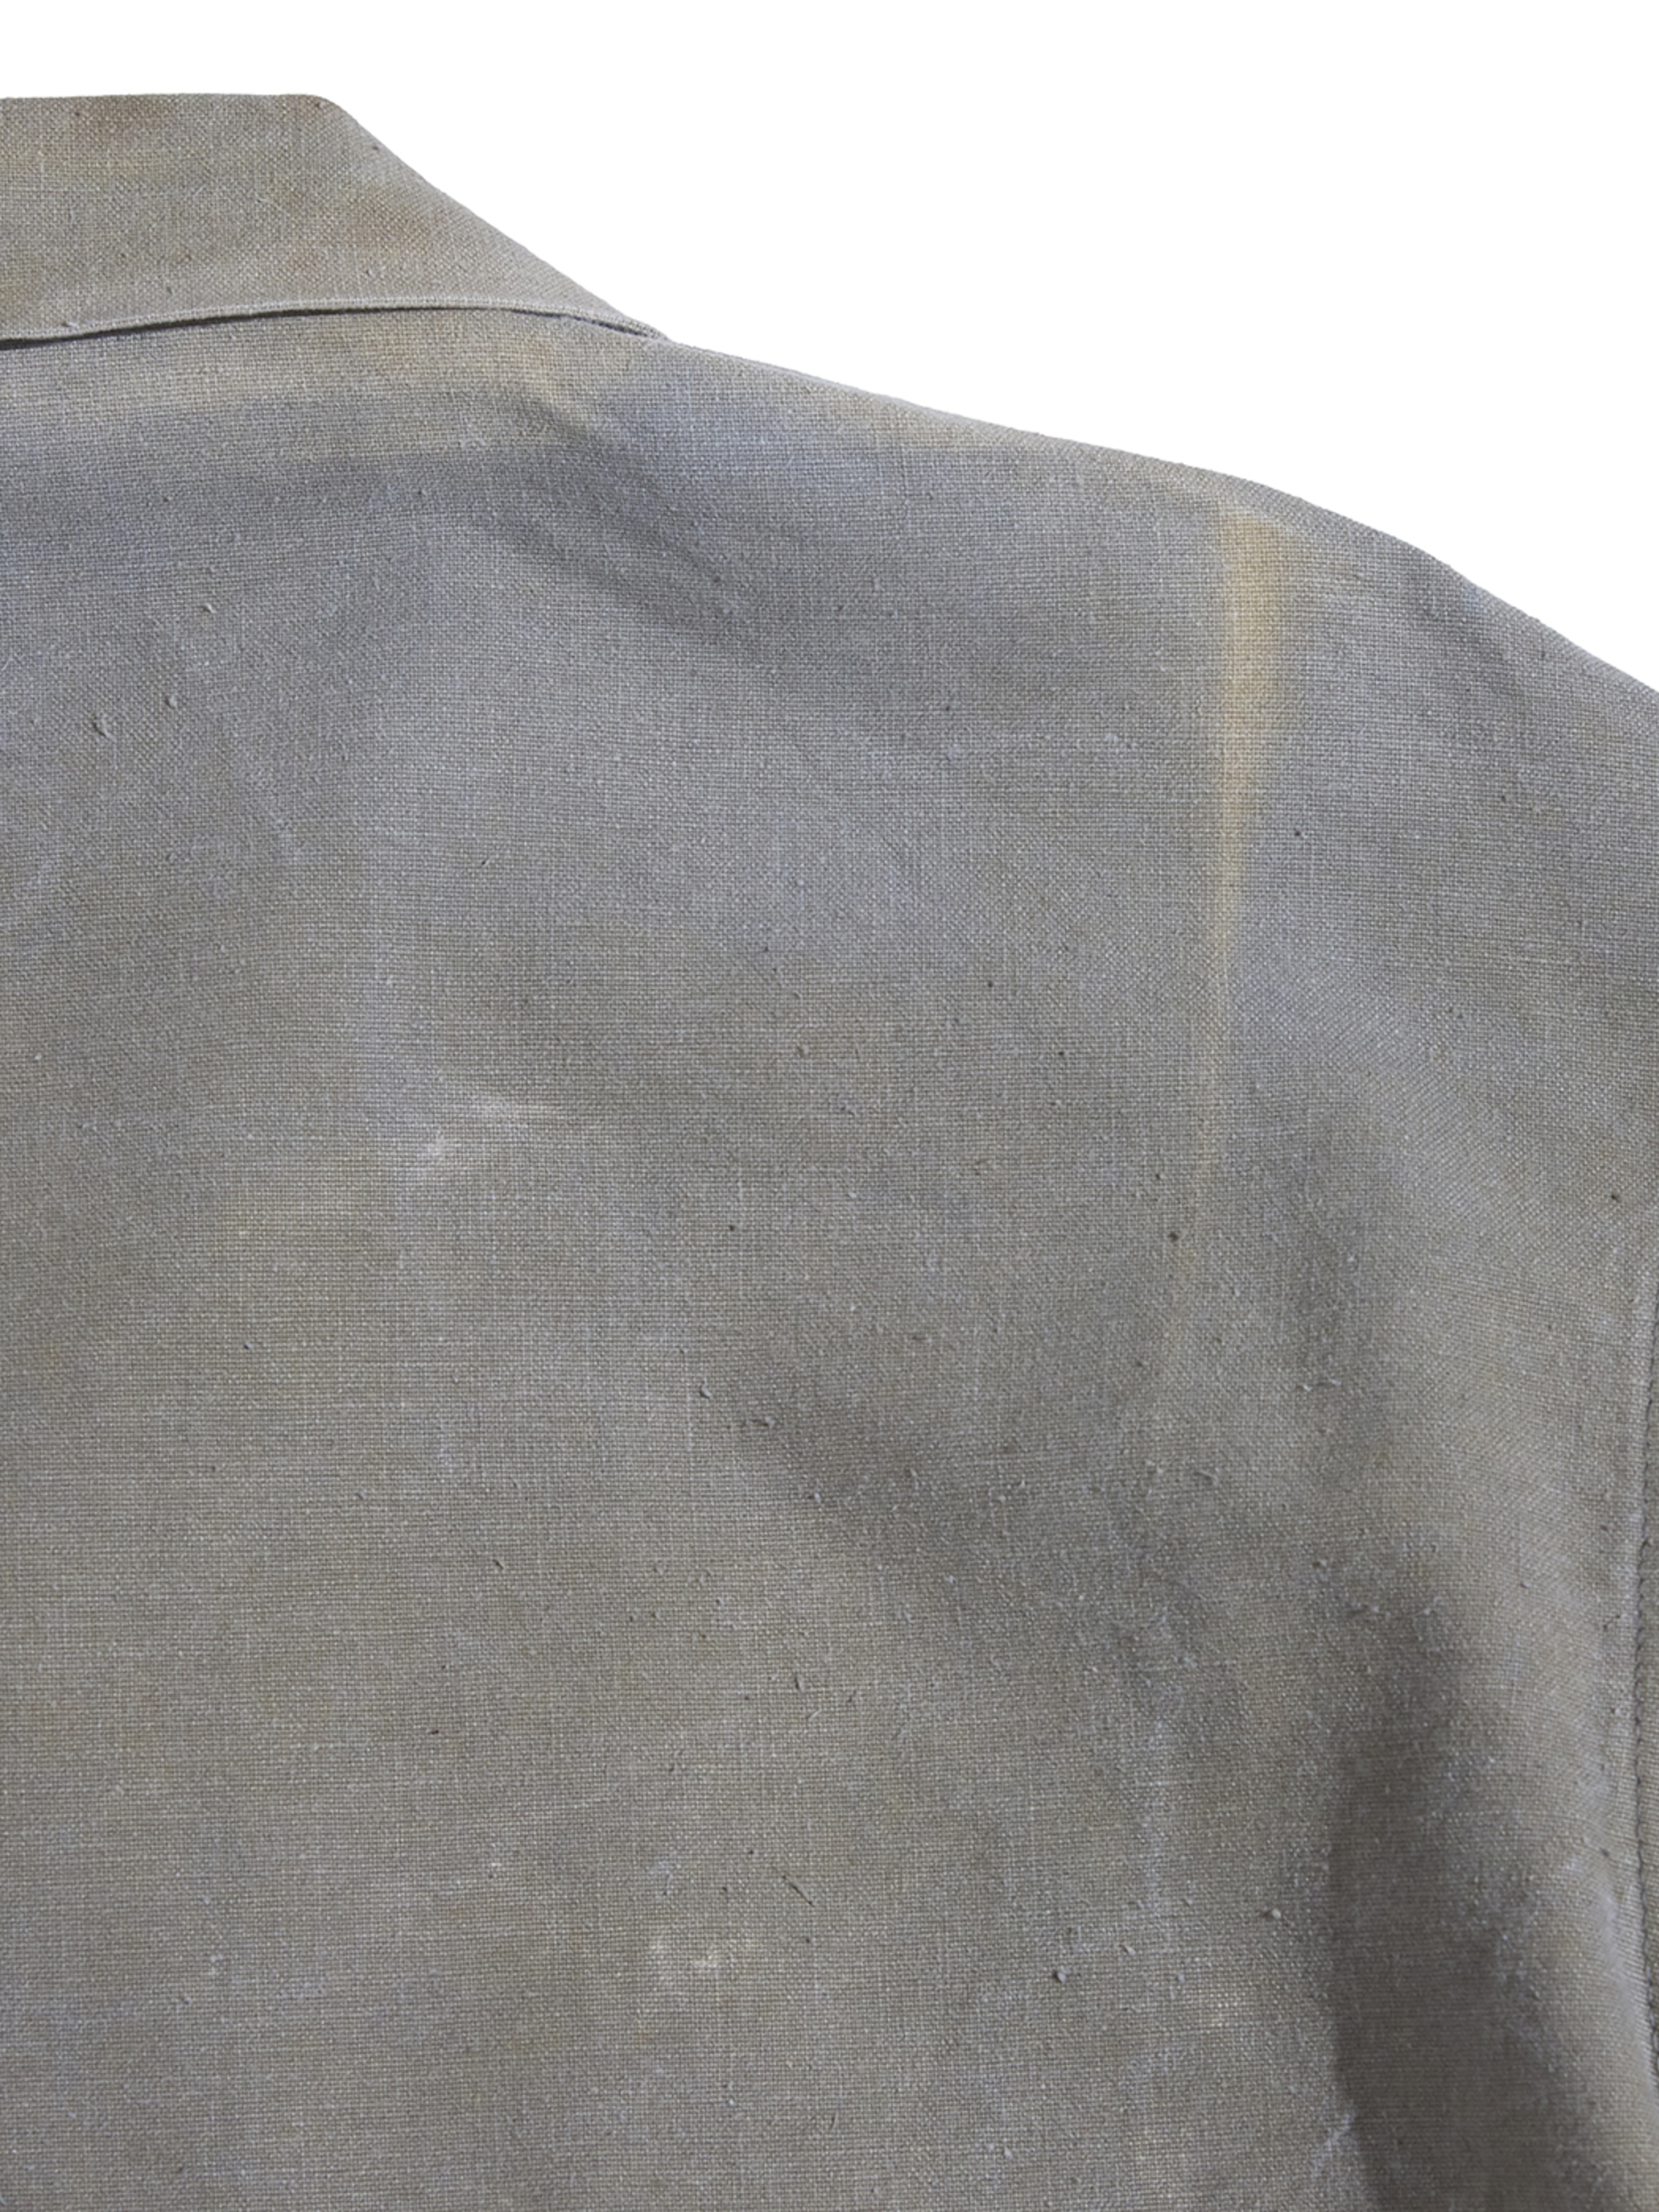 1980s "unknown" back painted work jacket -GREY-